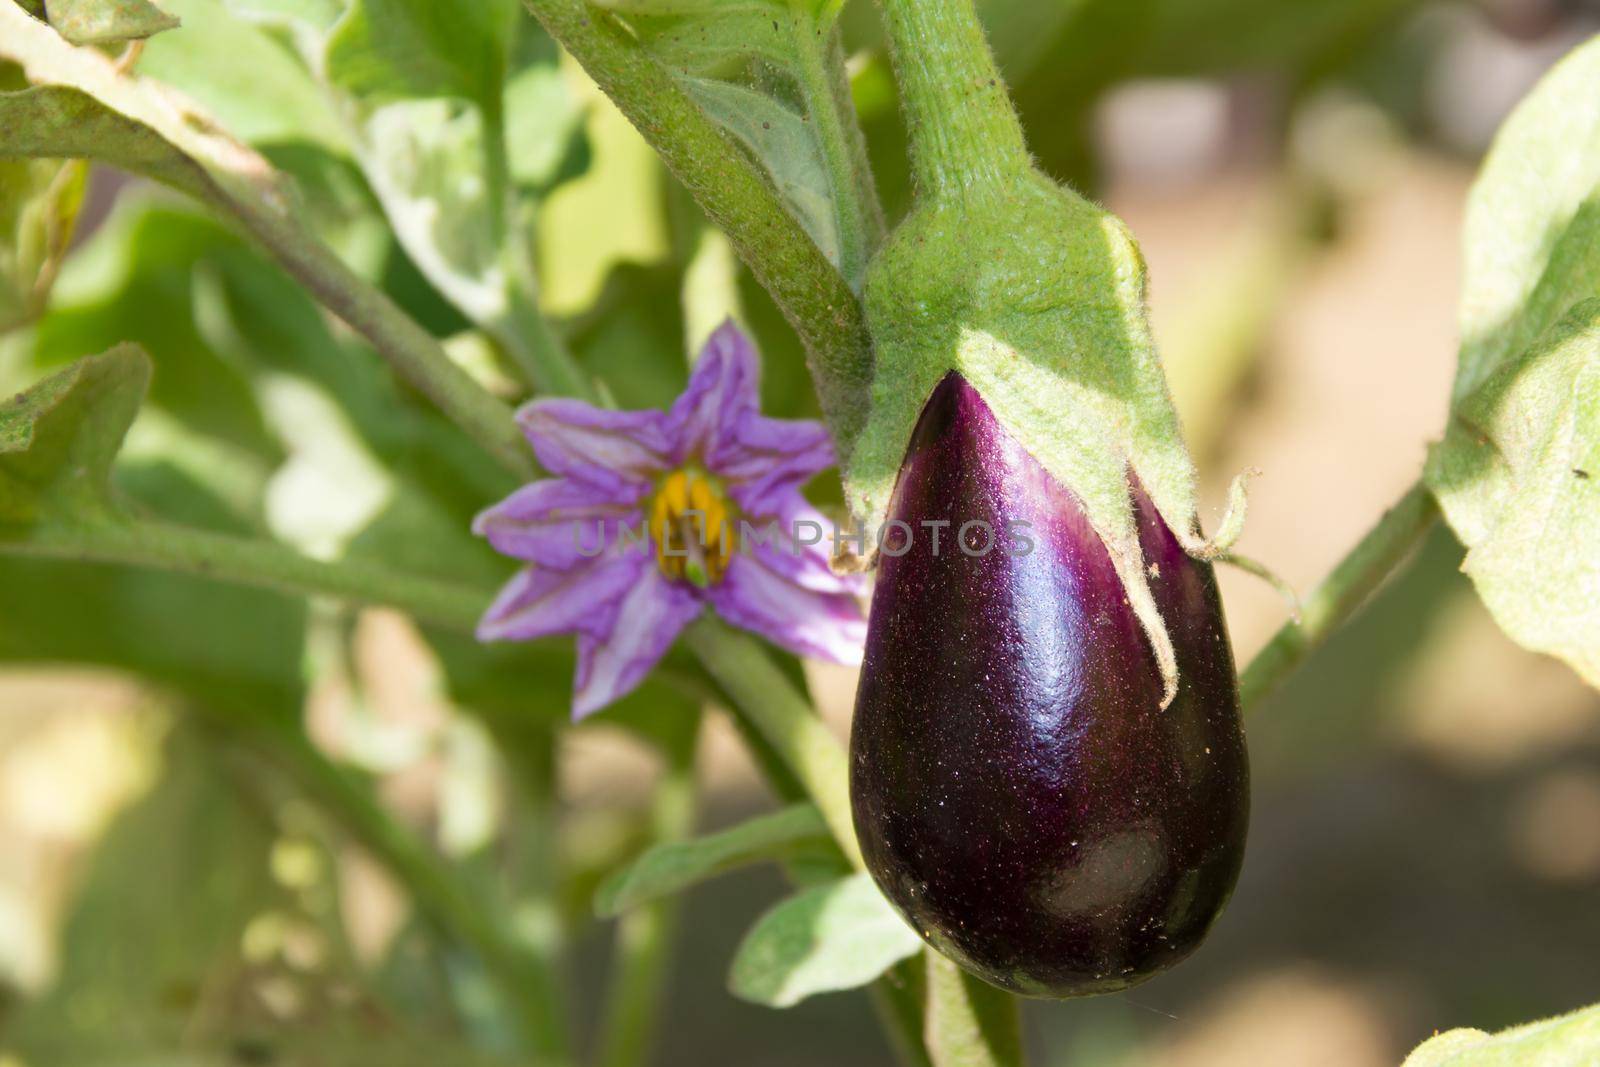 flowers and fruits of violet aubergines in the organic garden plant by GabrielaBertolini